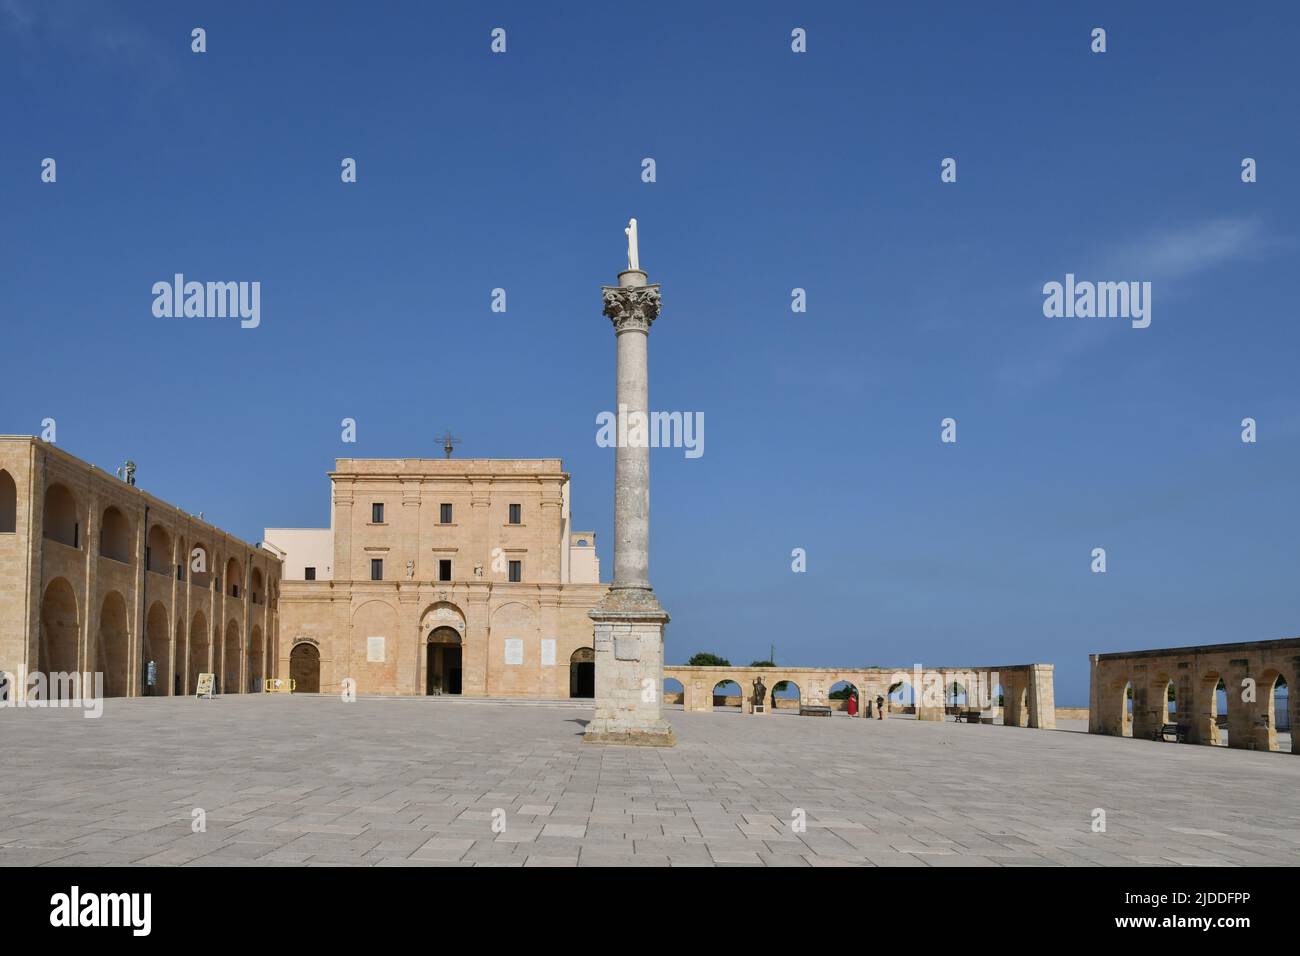 View of the square of the sanctuary of Santa Maria di Leuca, a town in southern Italy in the province of Lecce. Stock Photo